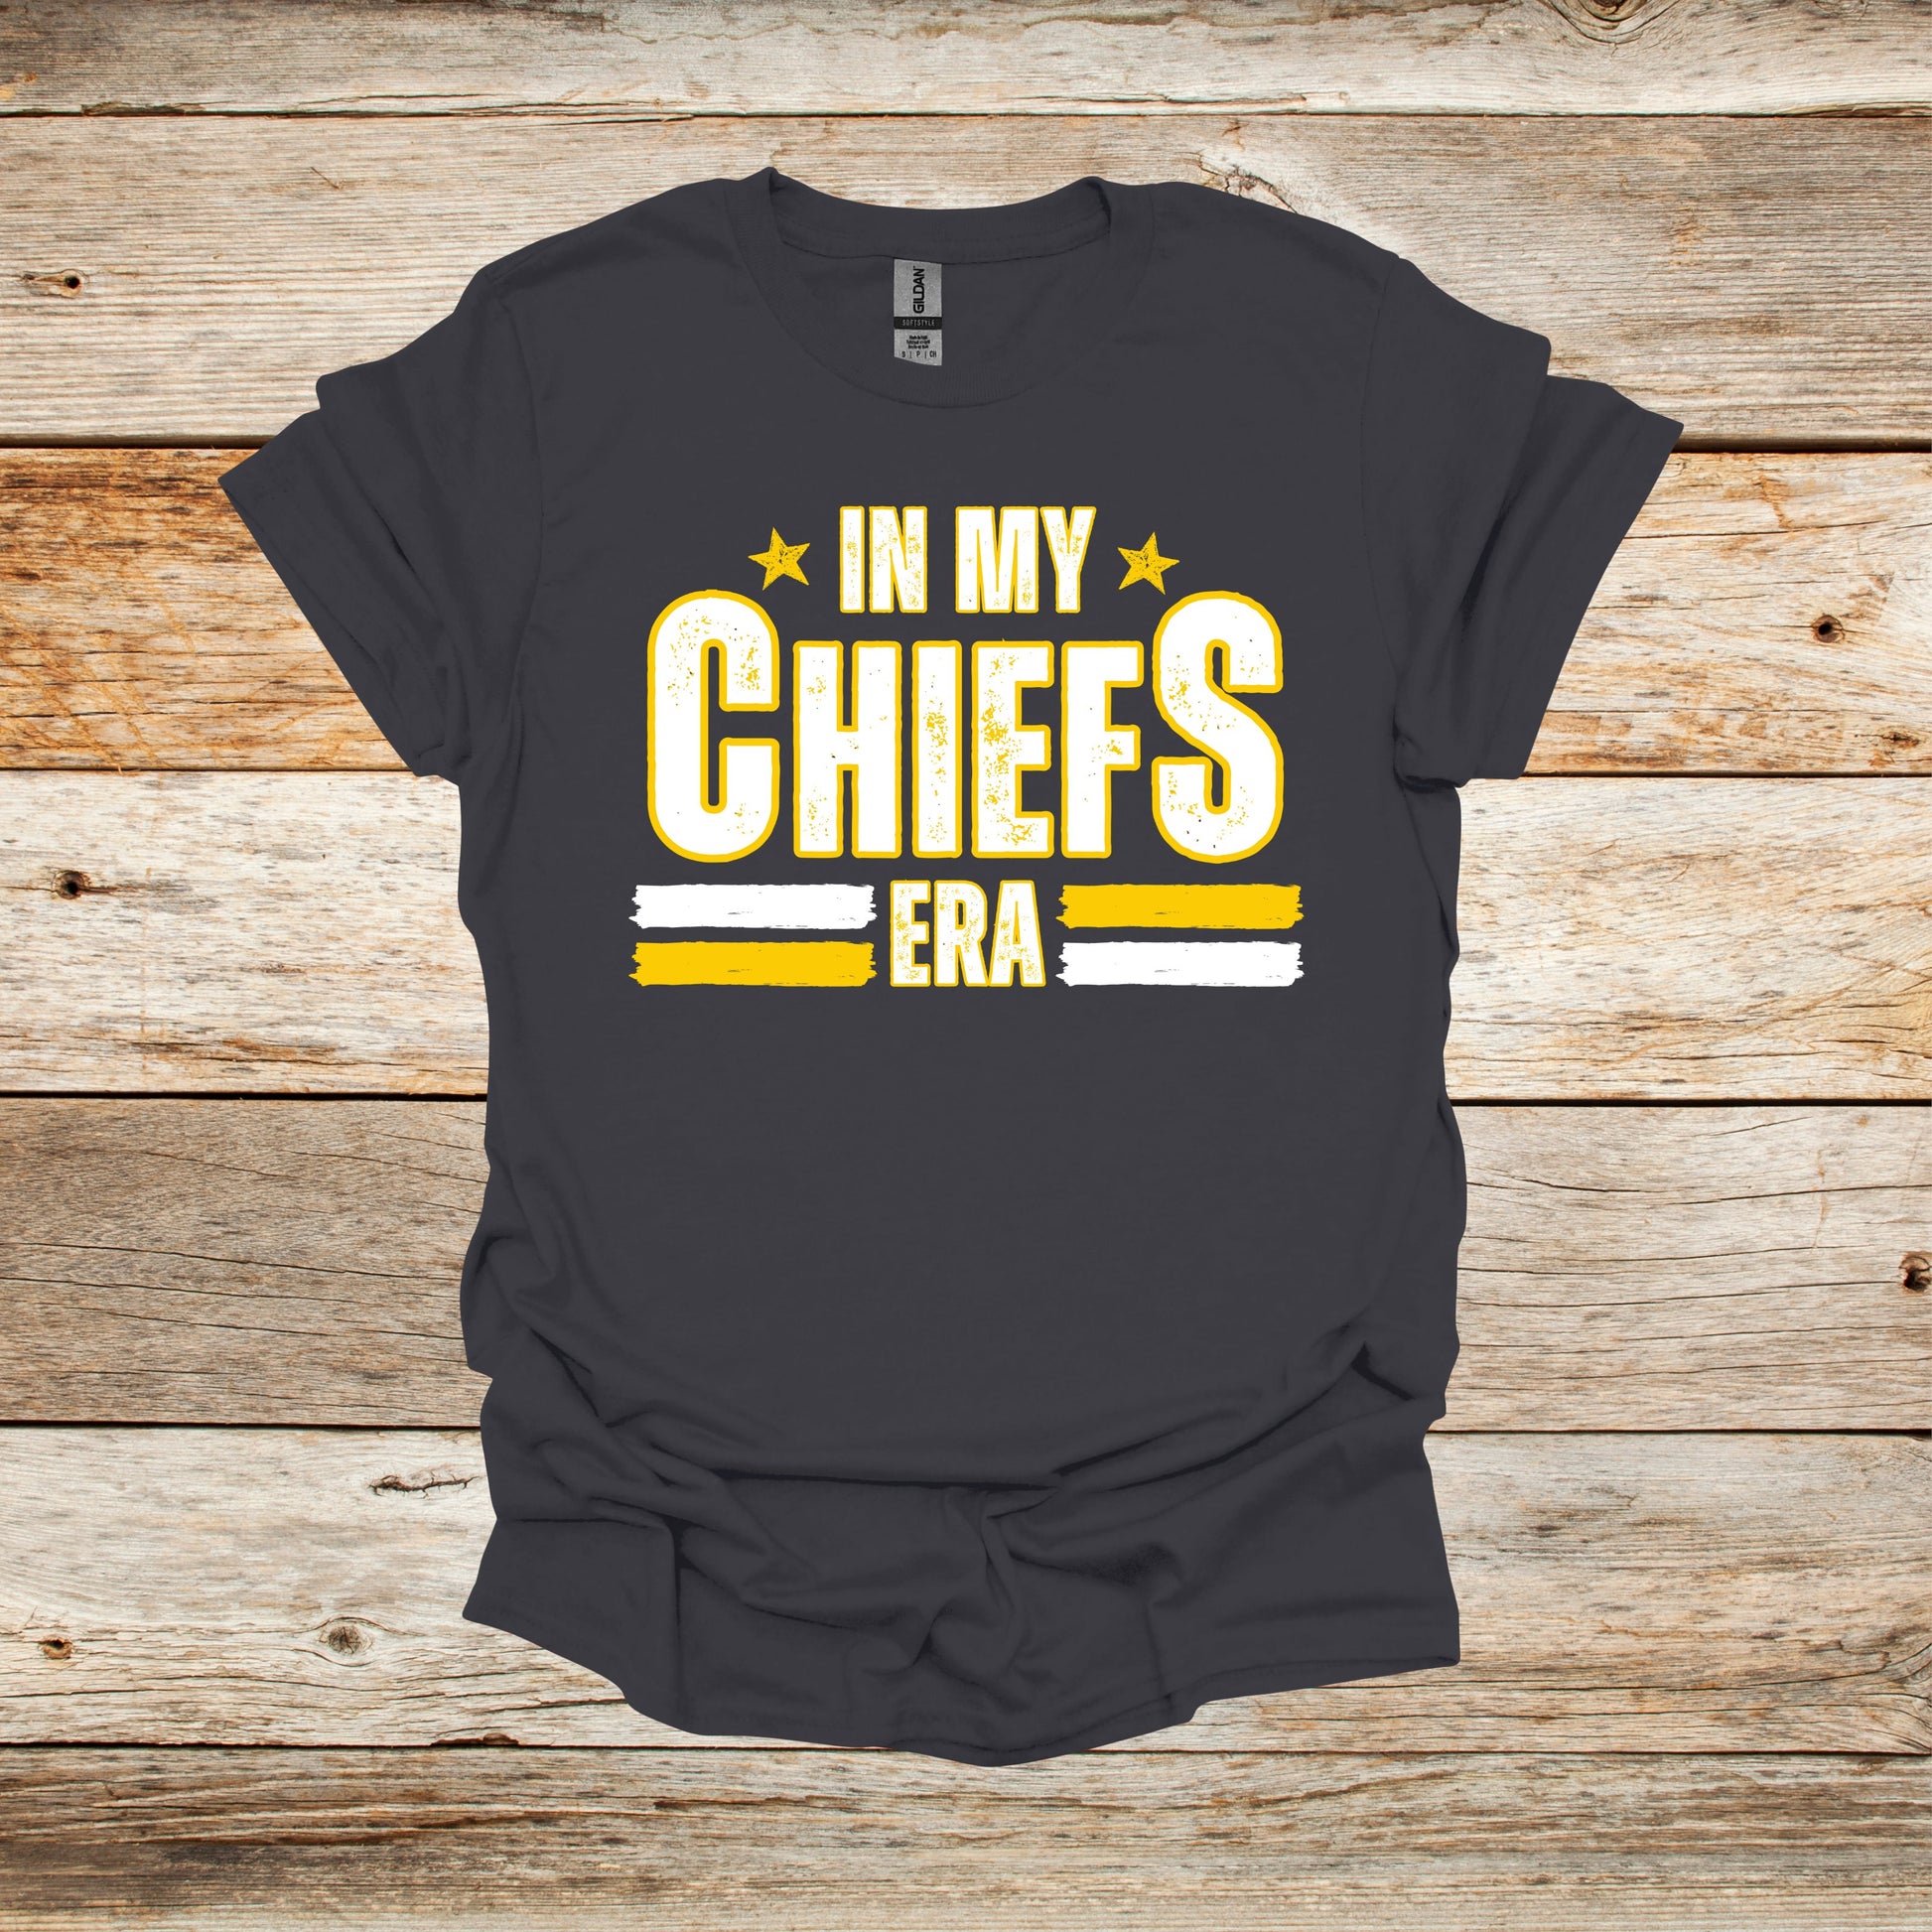 Football T-Shirt - In My Chiefs Era - Kansas City Chiefs - Adult and Children's Tee Shirts - Chiefs - Sports T-Shirts Graphic Avenue Charcoal Adult Small 